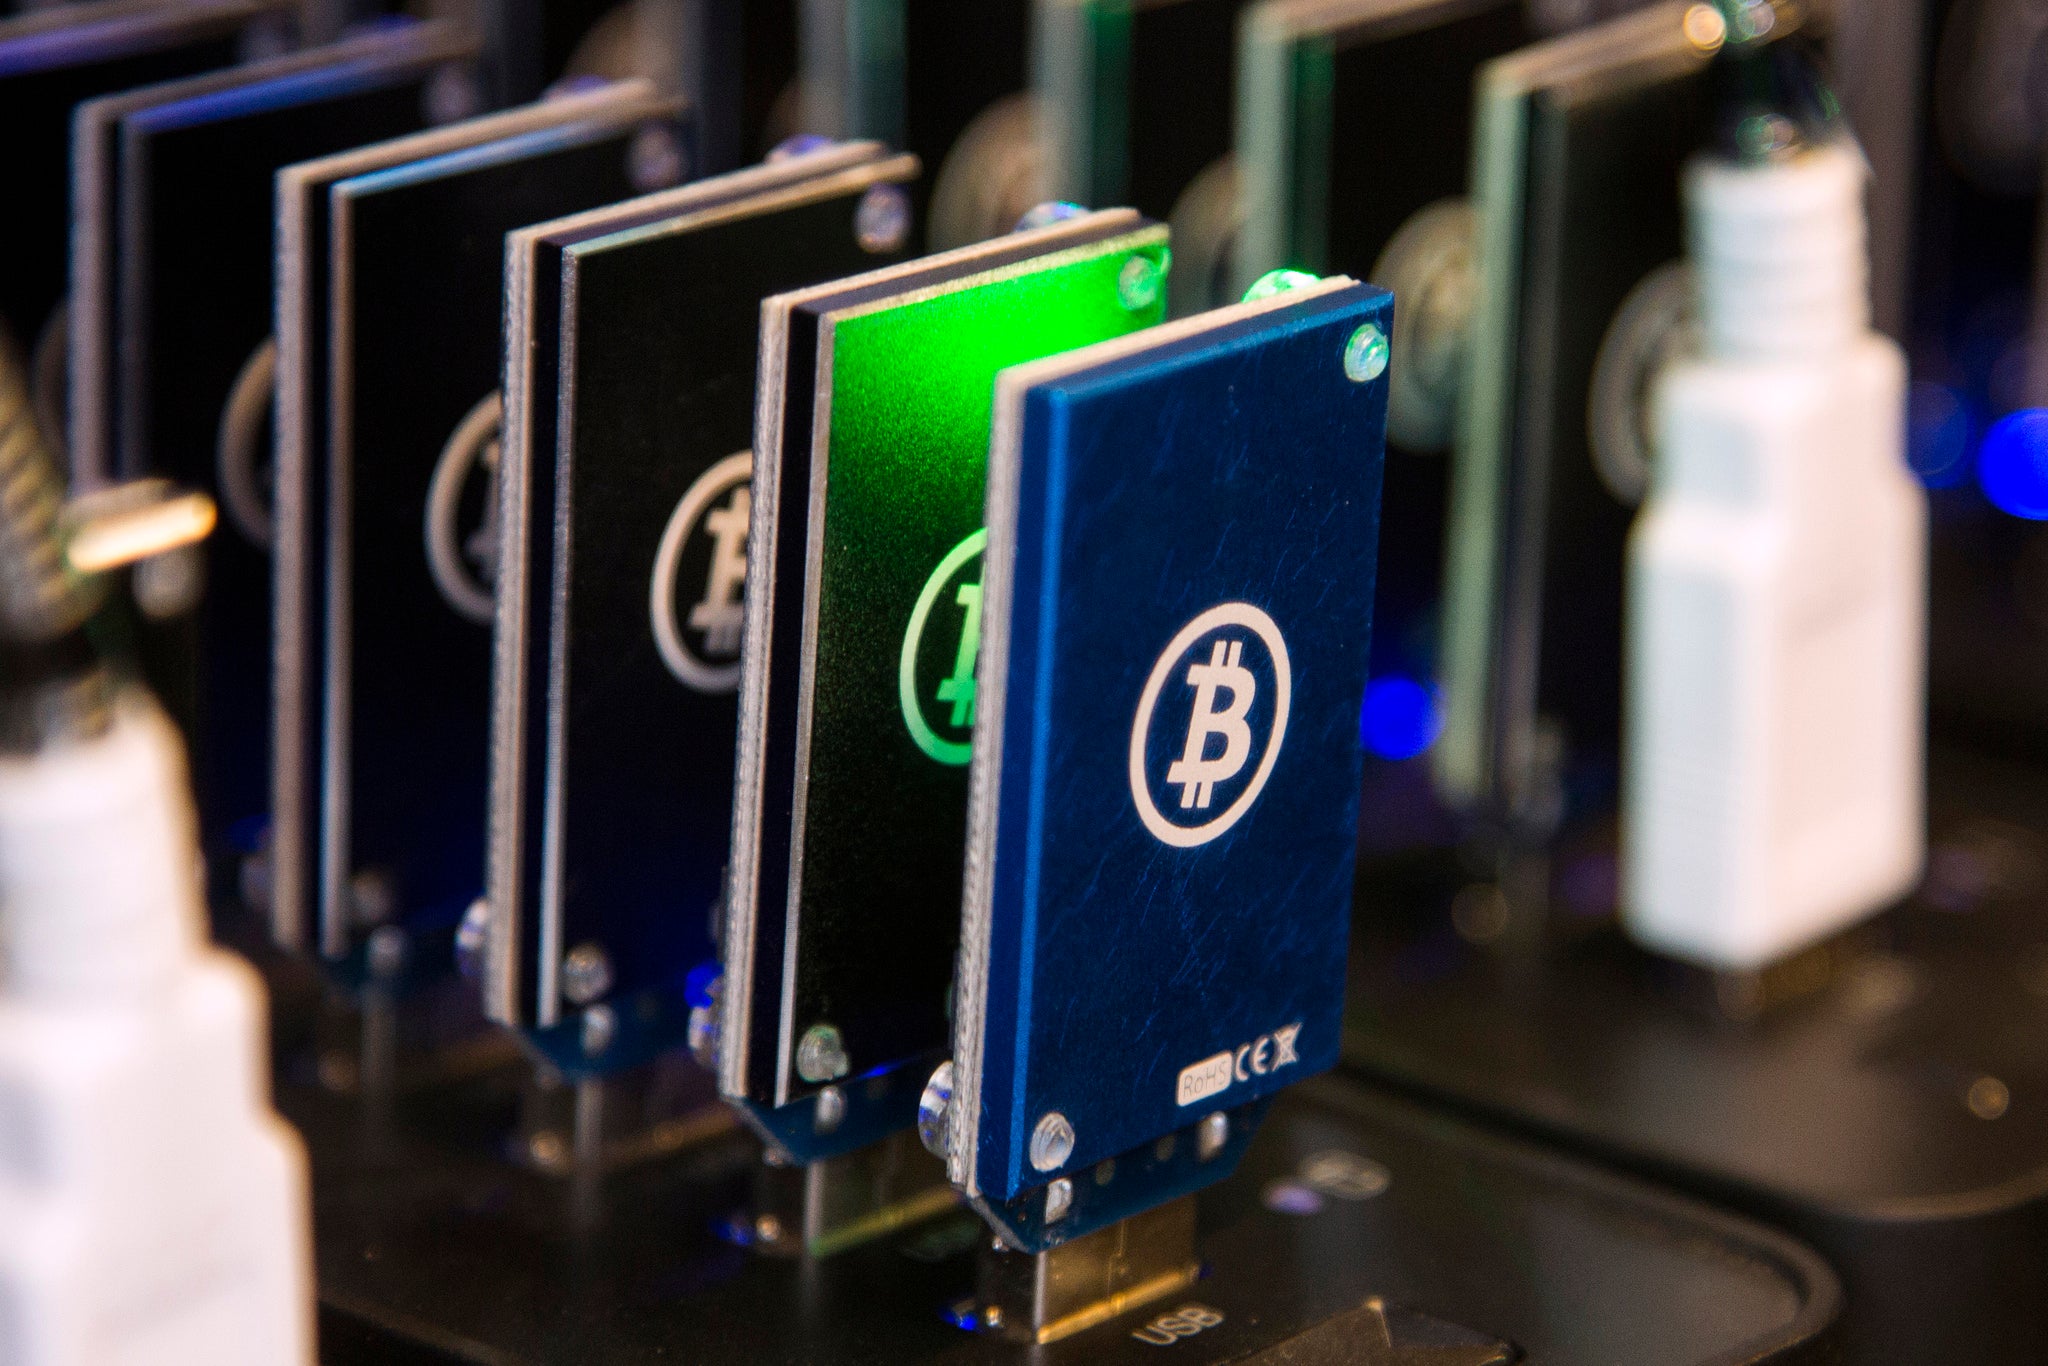 Specialized hardware is sold to mine bitcoins more efficiently - but even then, the cost in terms of energy is significant.